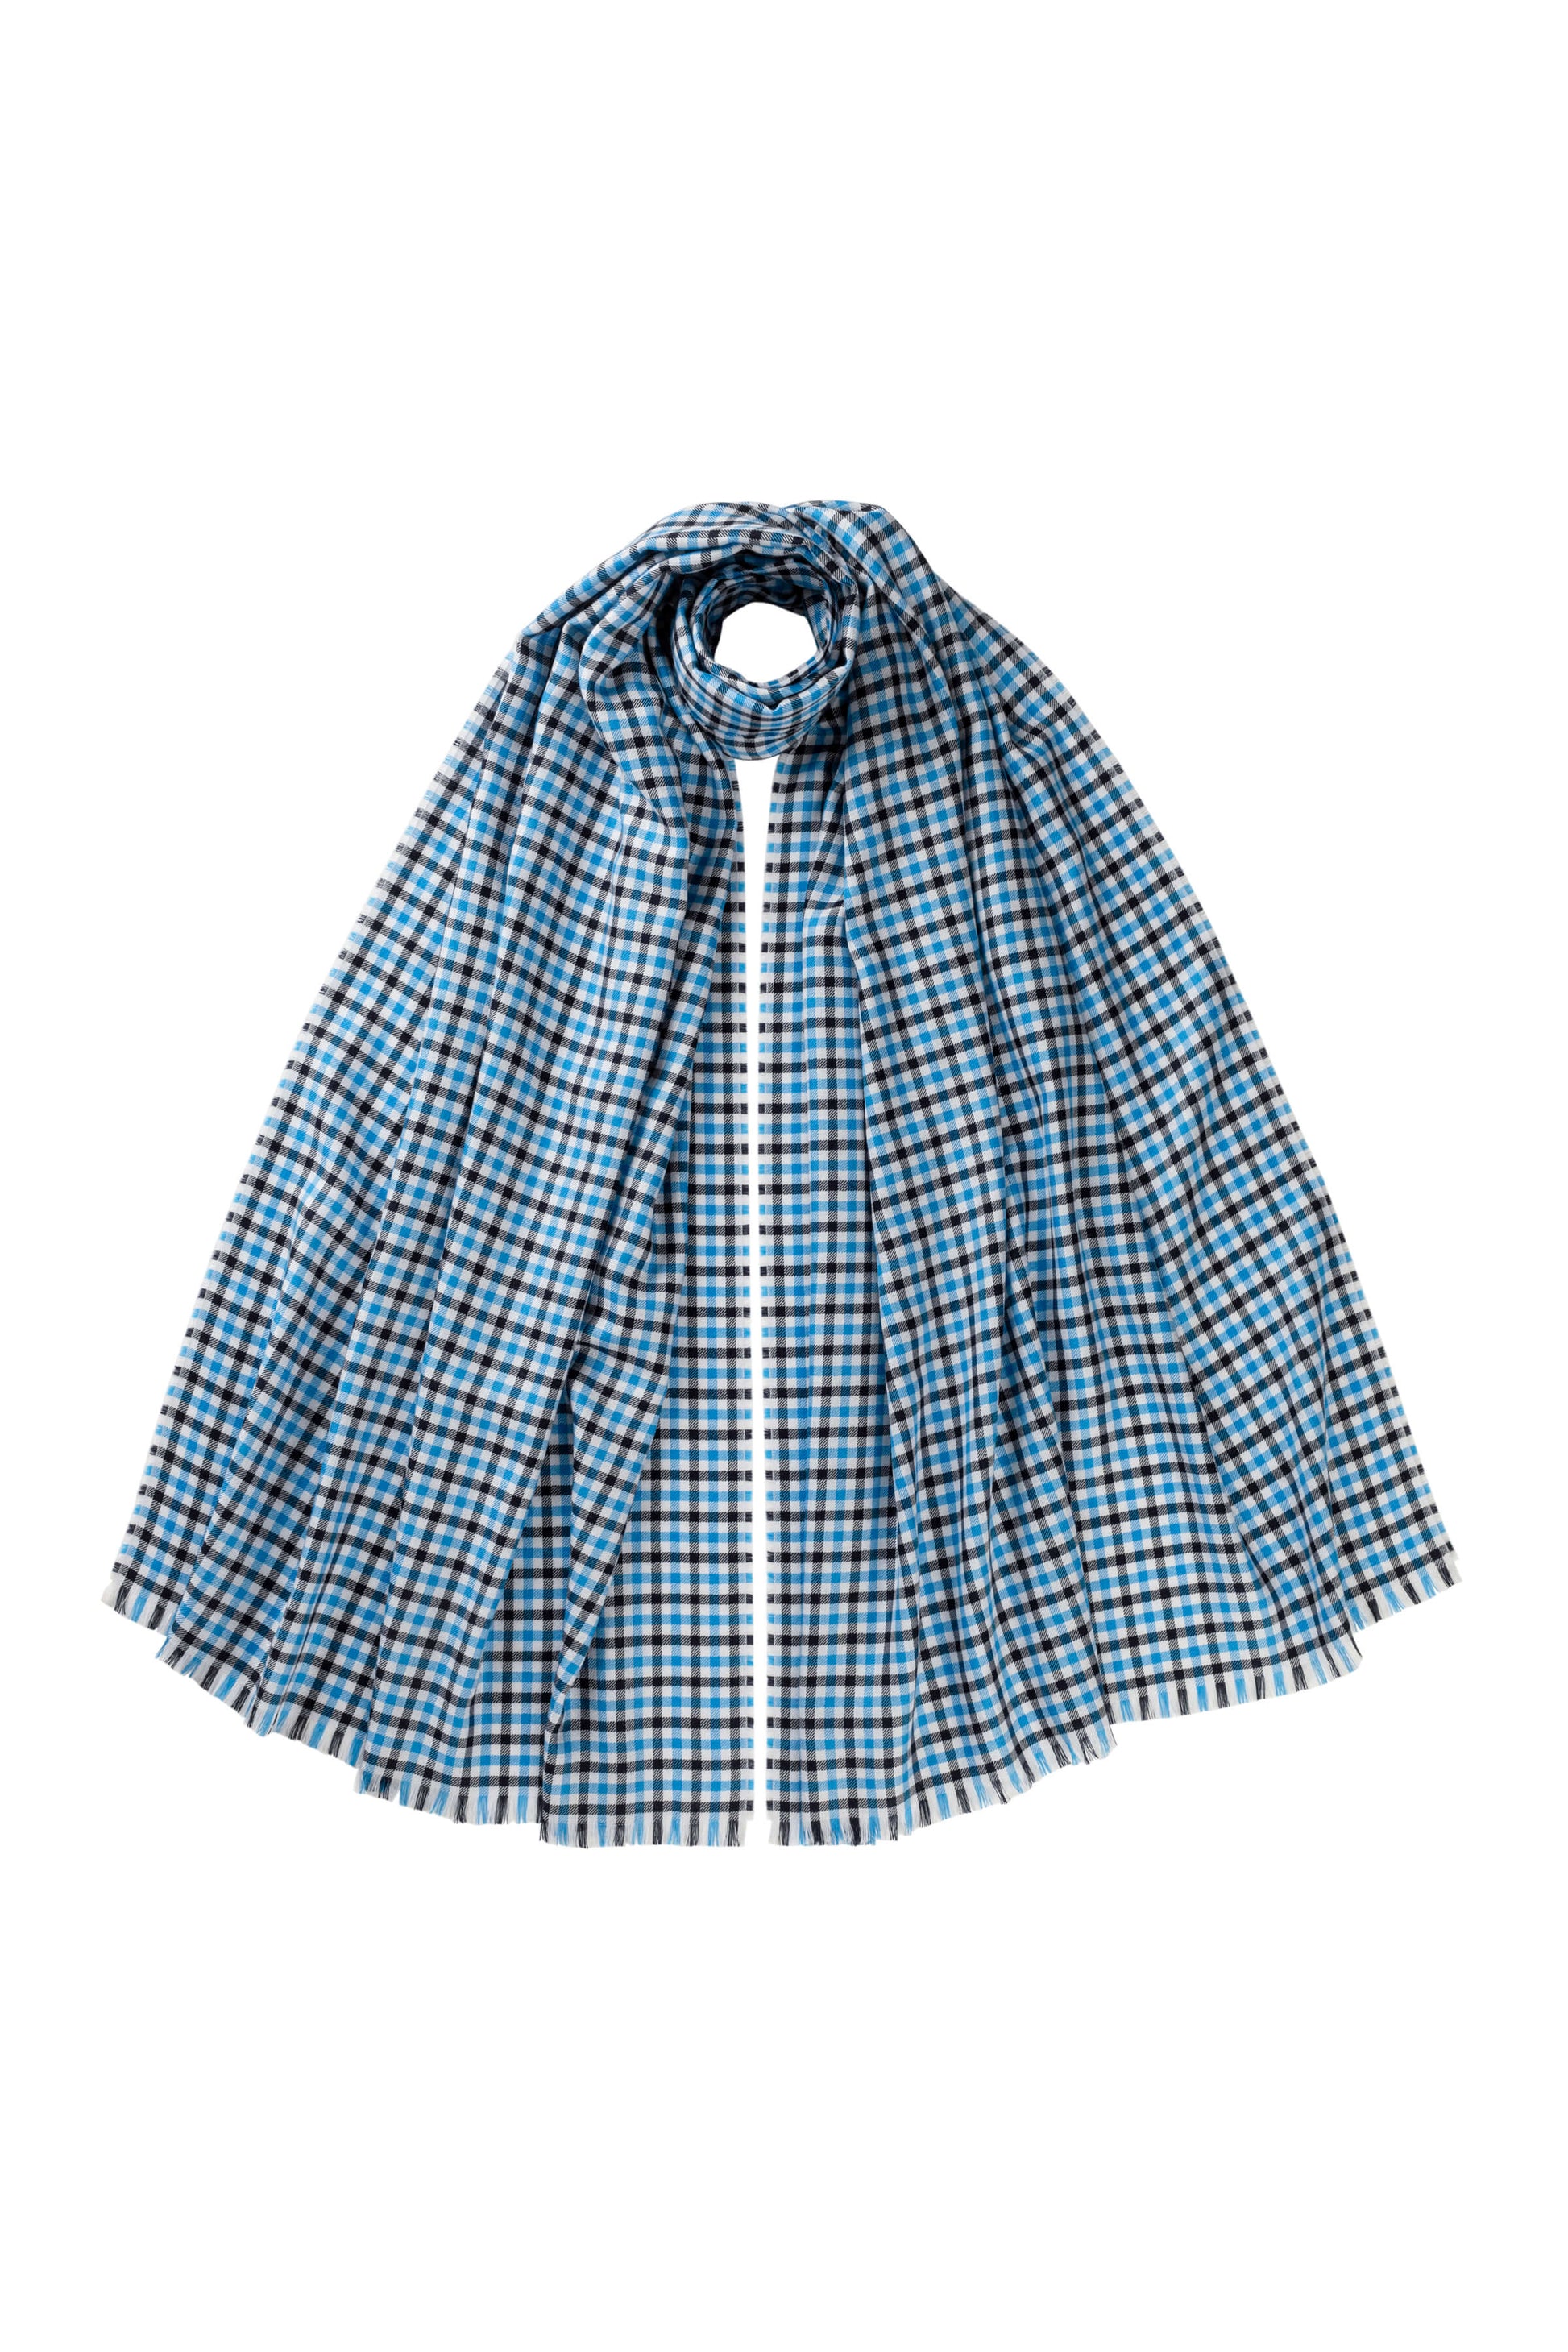 Johnstons of Elgin SS24 Accessories Blue Small Gingham Stole WB002472RU7407ONE